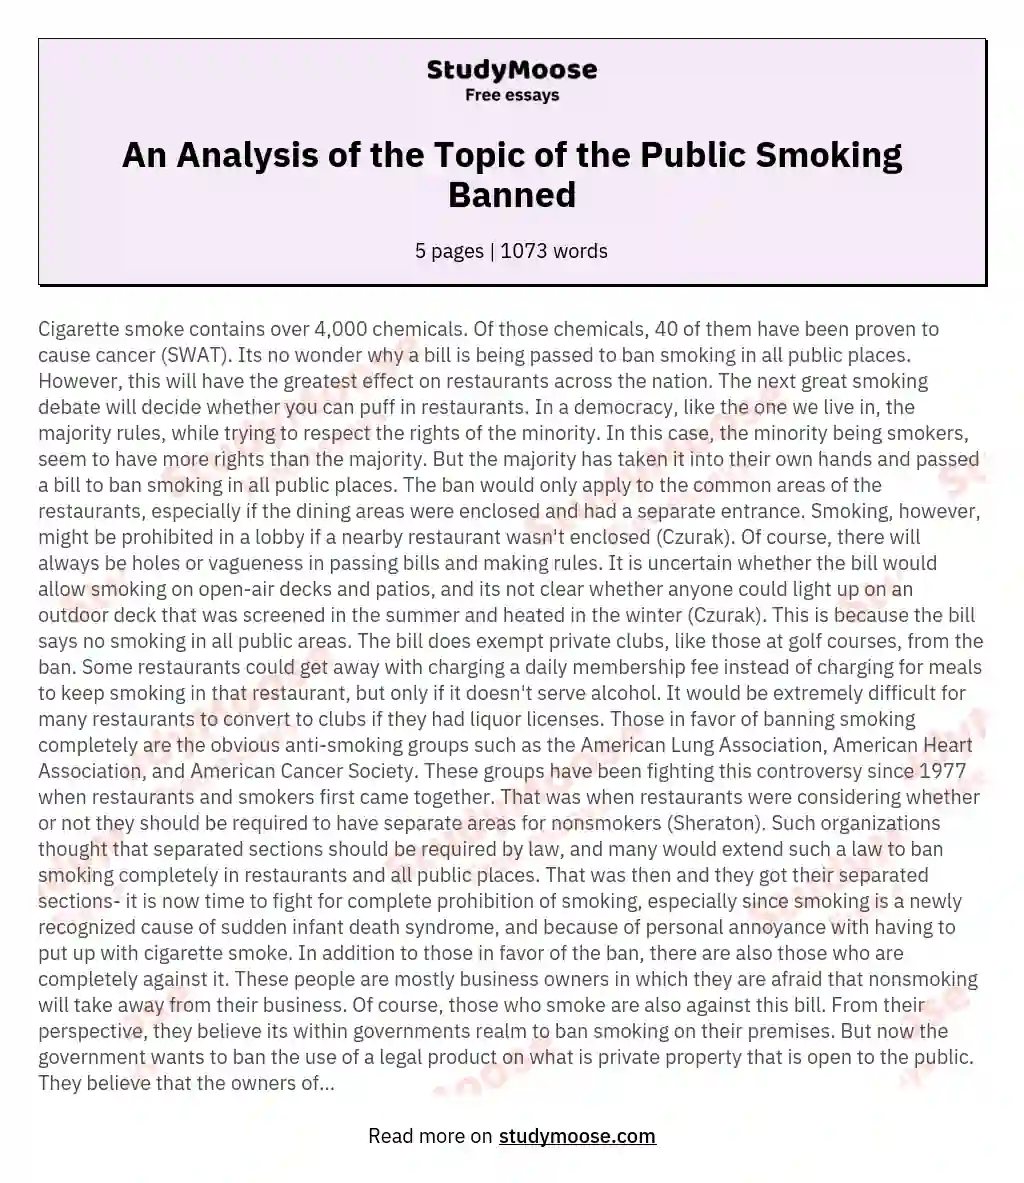 An Analysis of the Topic of the Public Smoking Banned essay